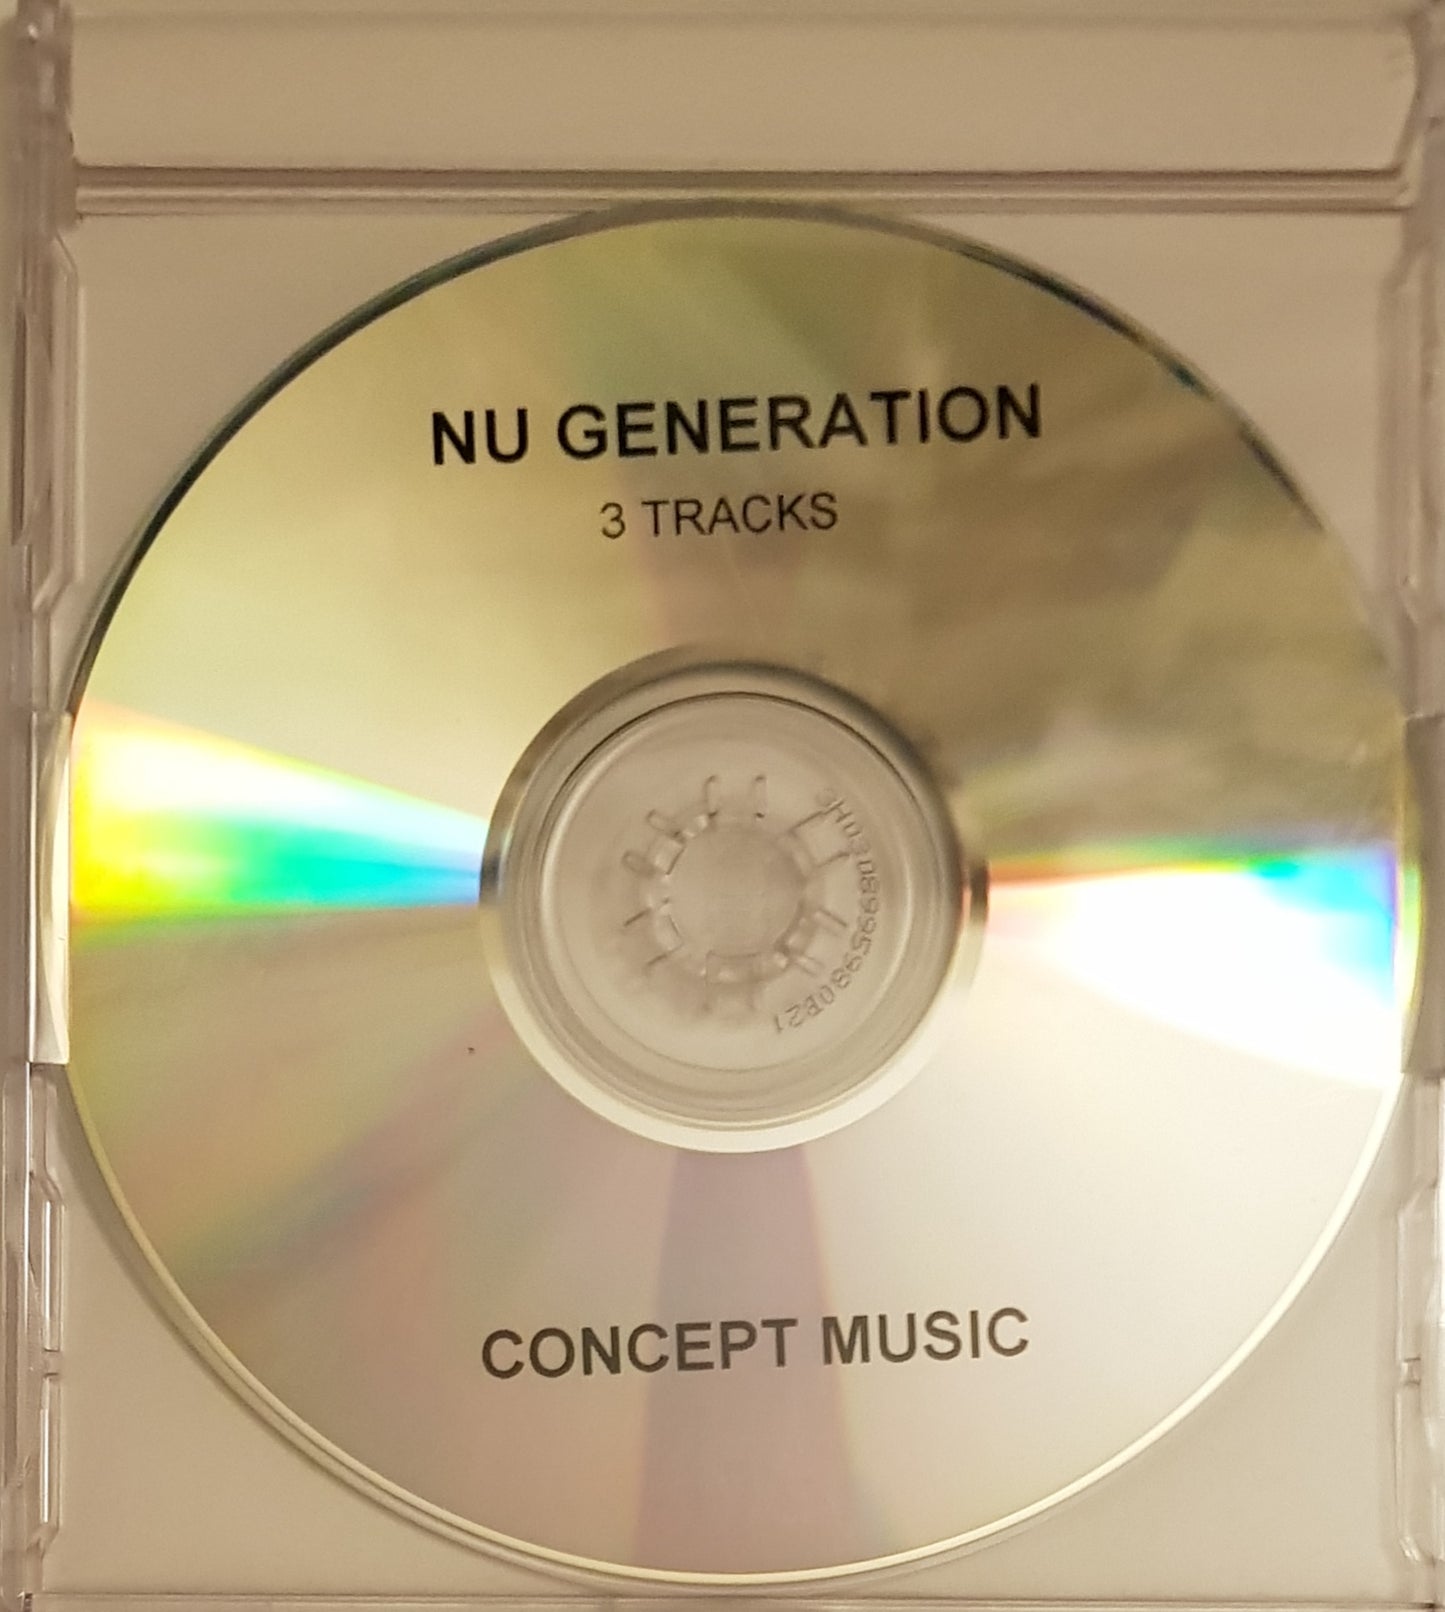 Nu Generation: In Your Arms (Rescue Me) Promo Maxi-Single (VG+/VG+)